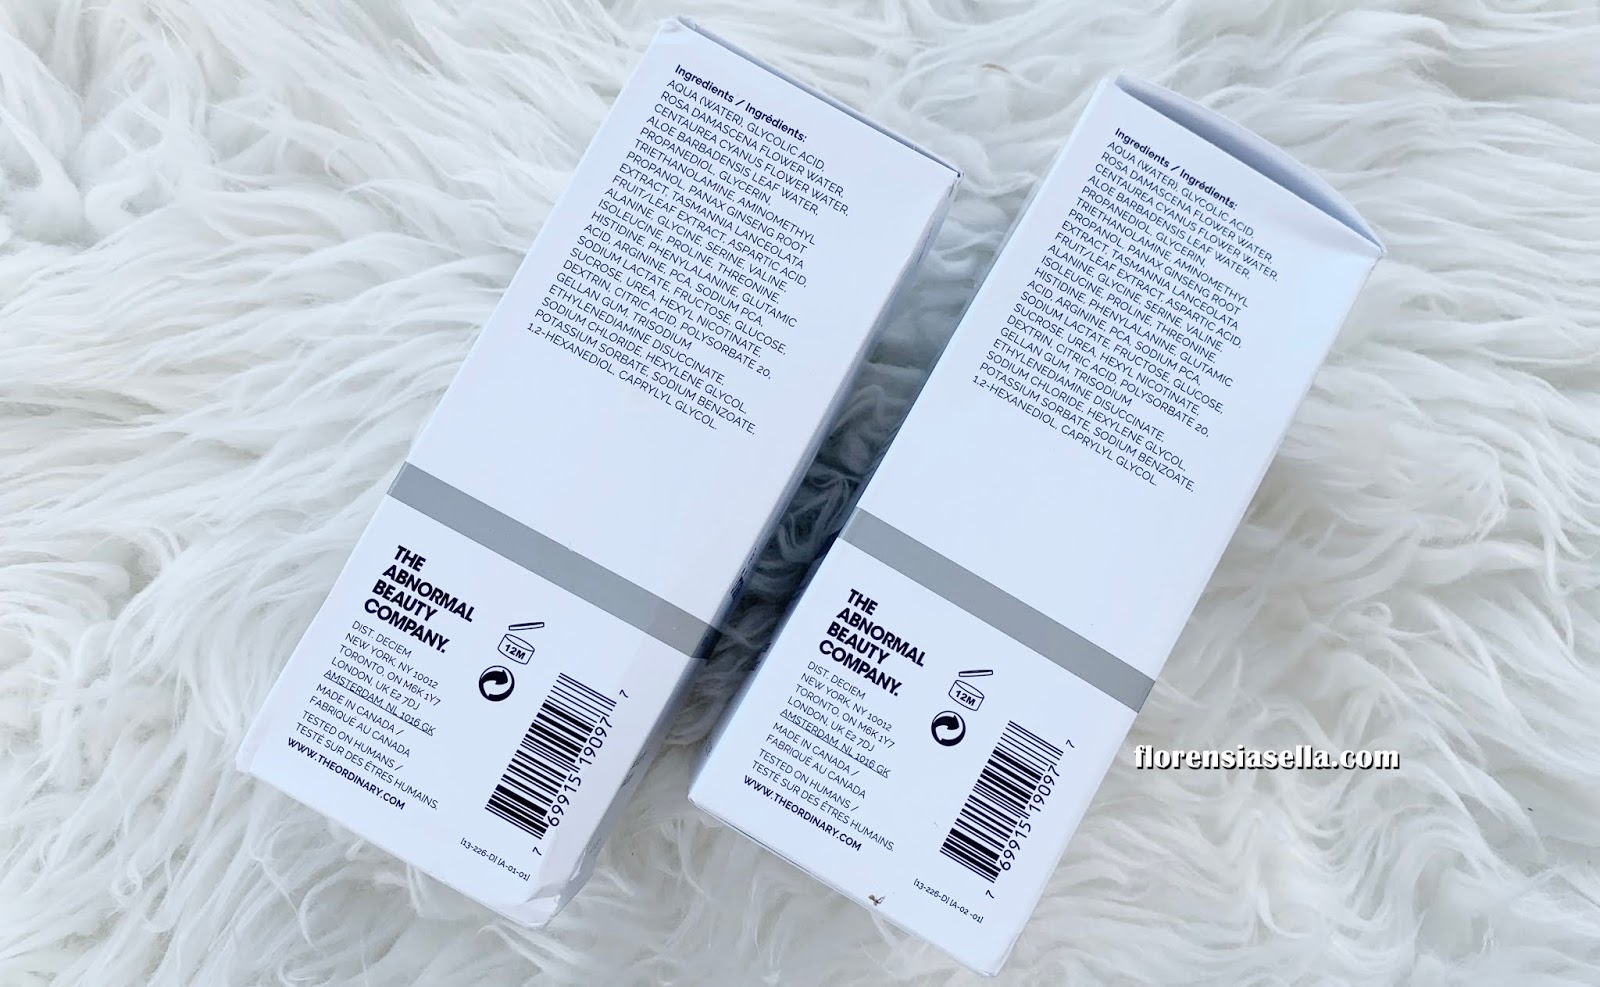 The ordinary glycolic 7 toning solution. Glycolic acid 7% Toning solution. Гликолевая кислота Ординари. The ordinary Glycolic acid 7 Toning solution. Гликолевый тонер Glycolic acid 7% Toning solution, 240ml (the ordinary).